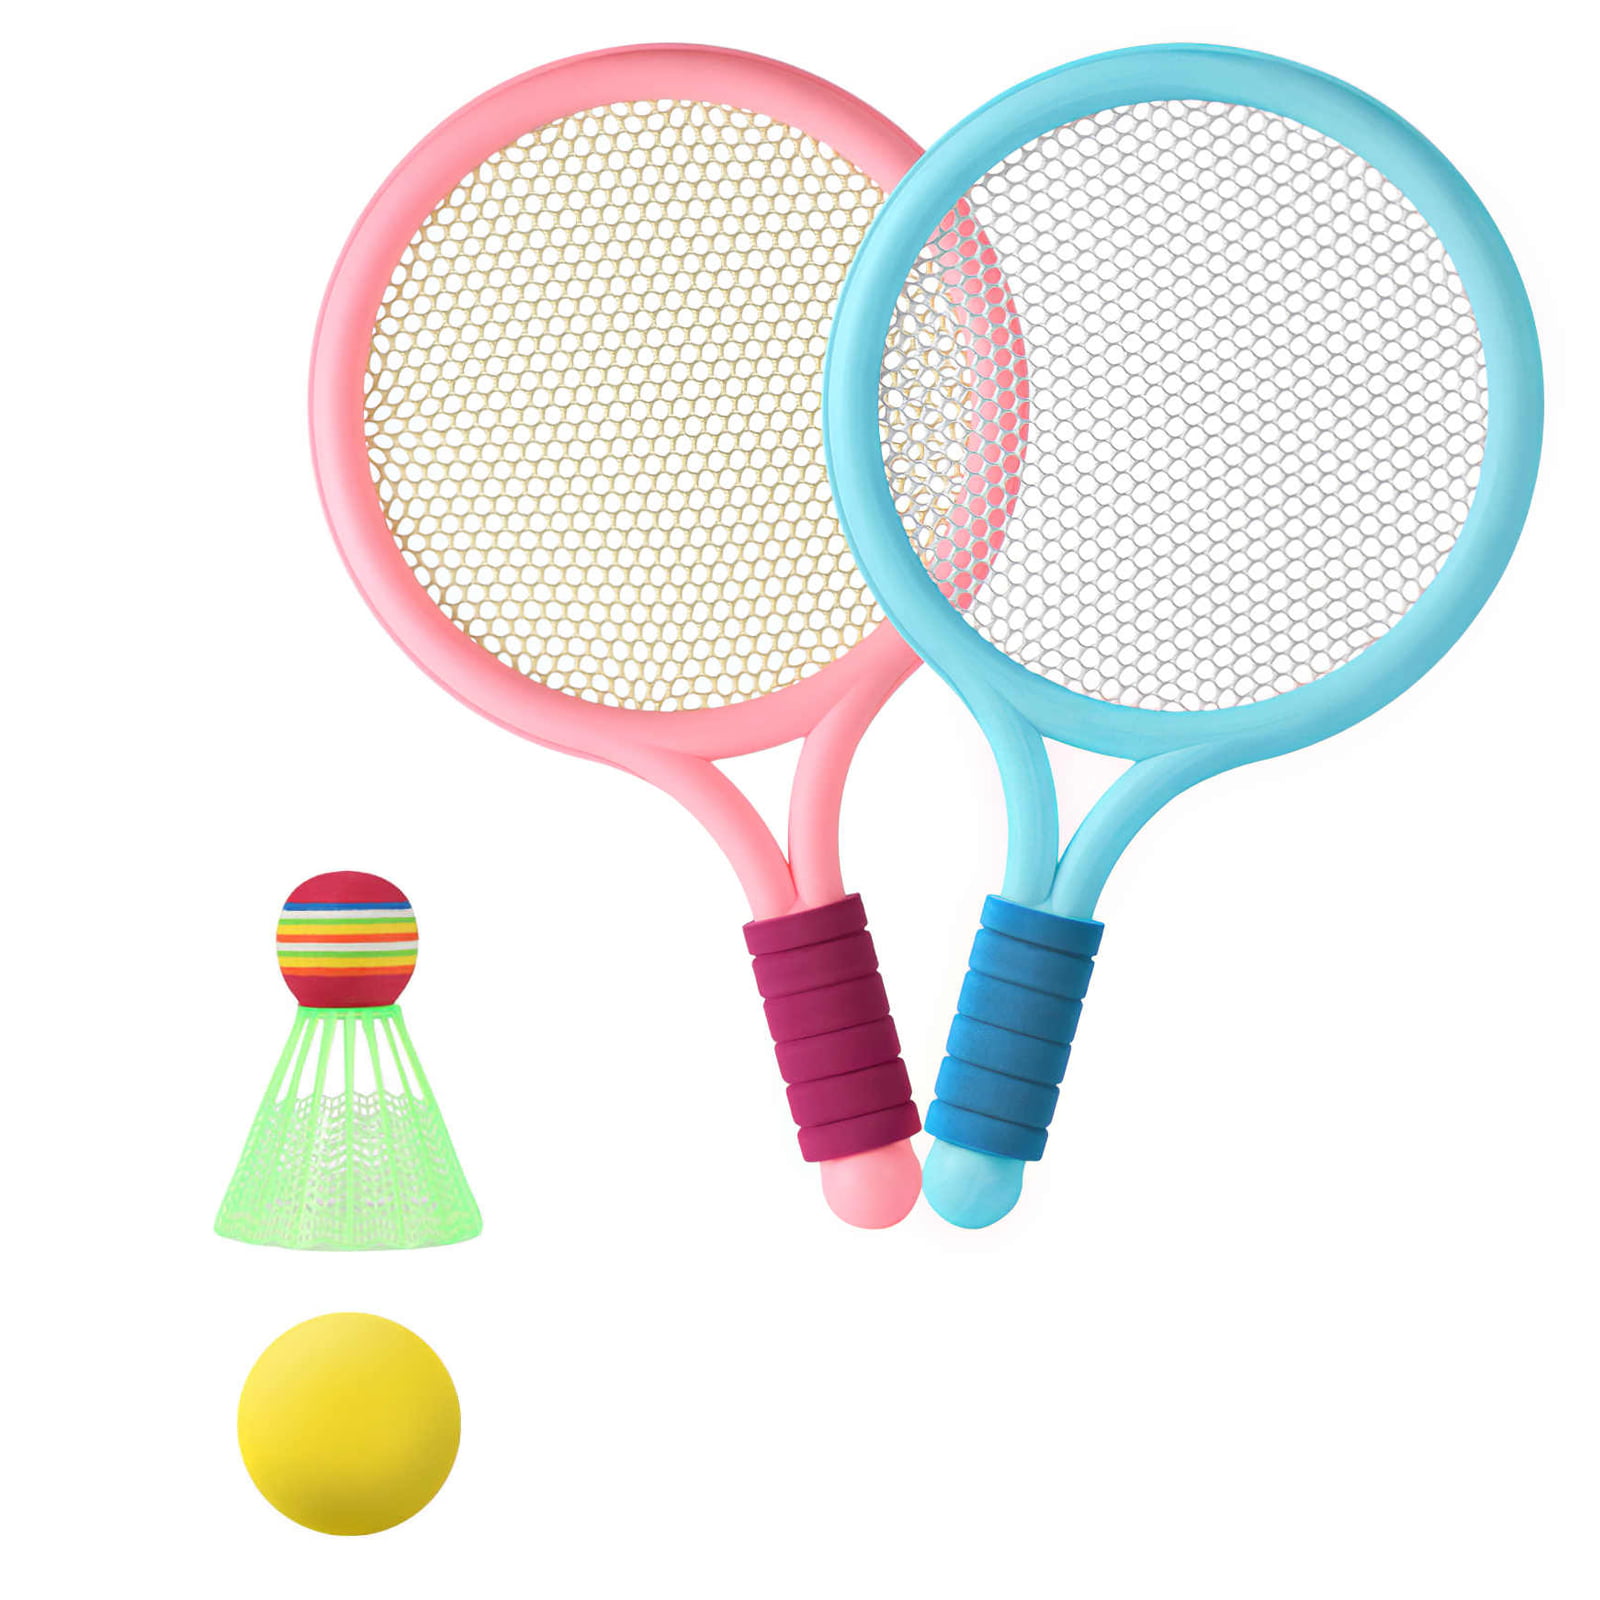 Beach Details about   Kids Badminton and Tennis Play Set with Easy to Grip Colorful Rackets 